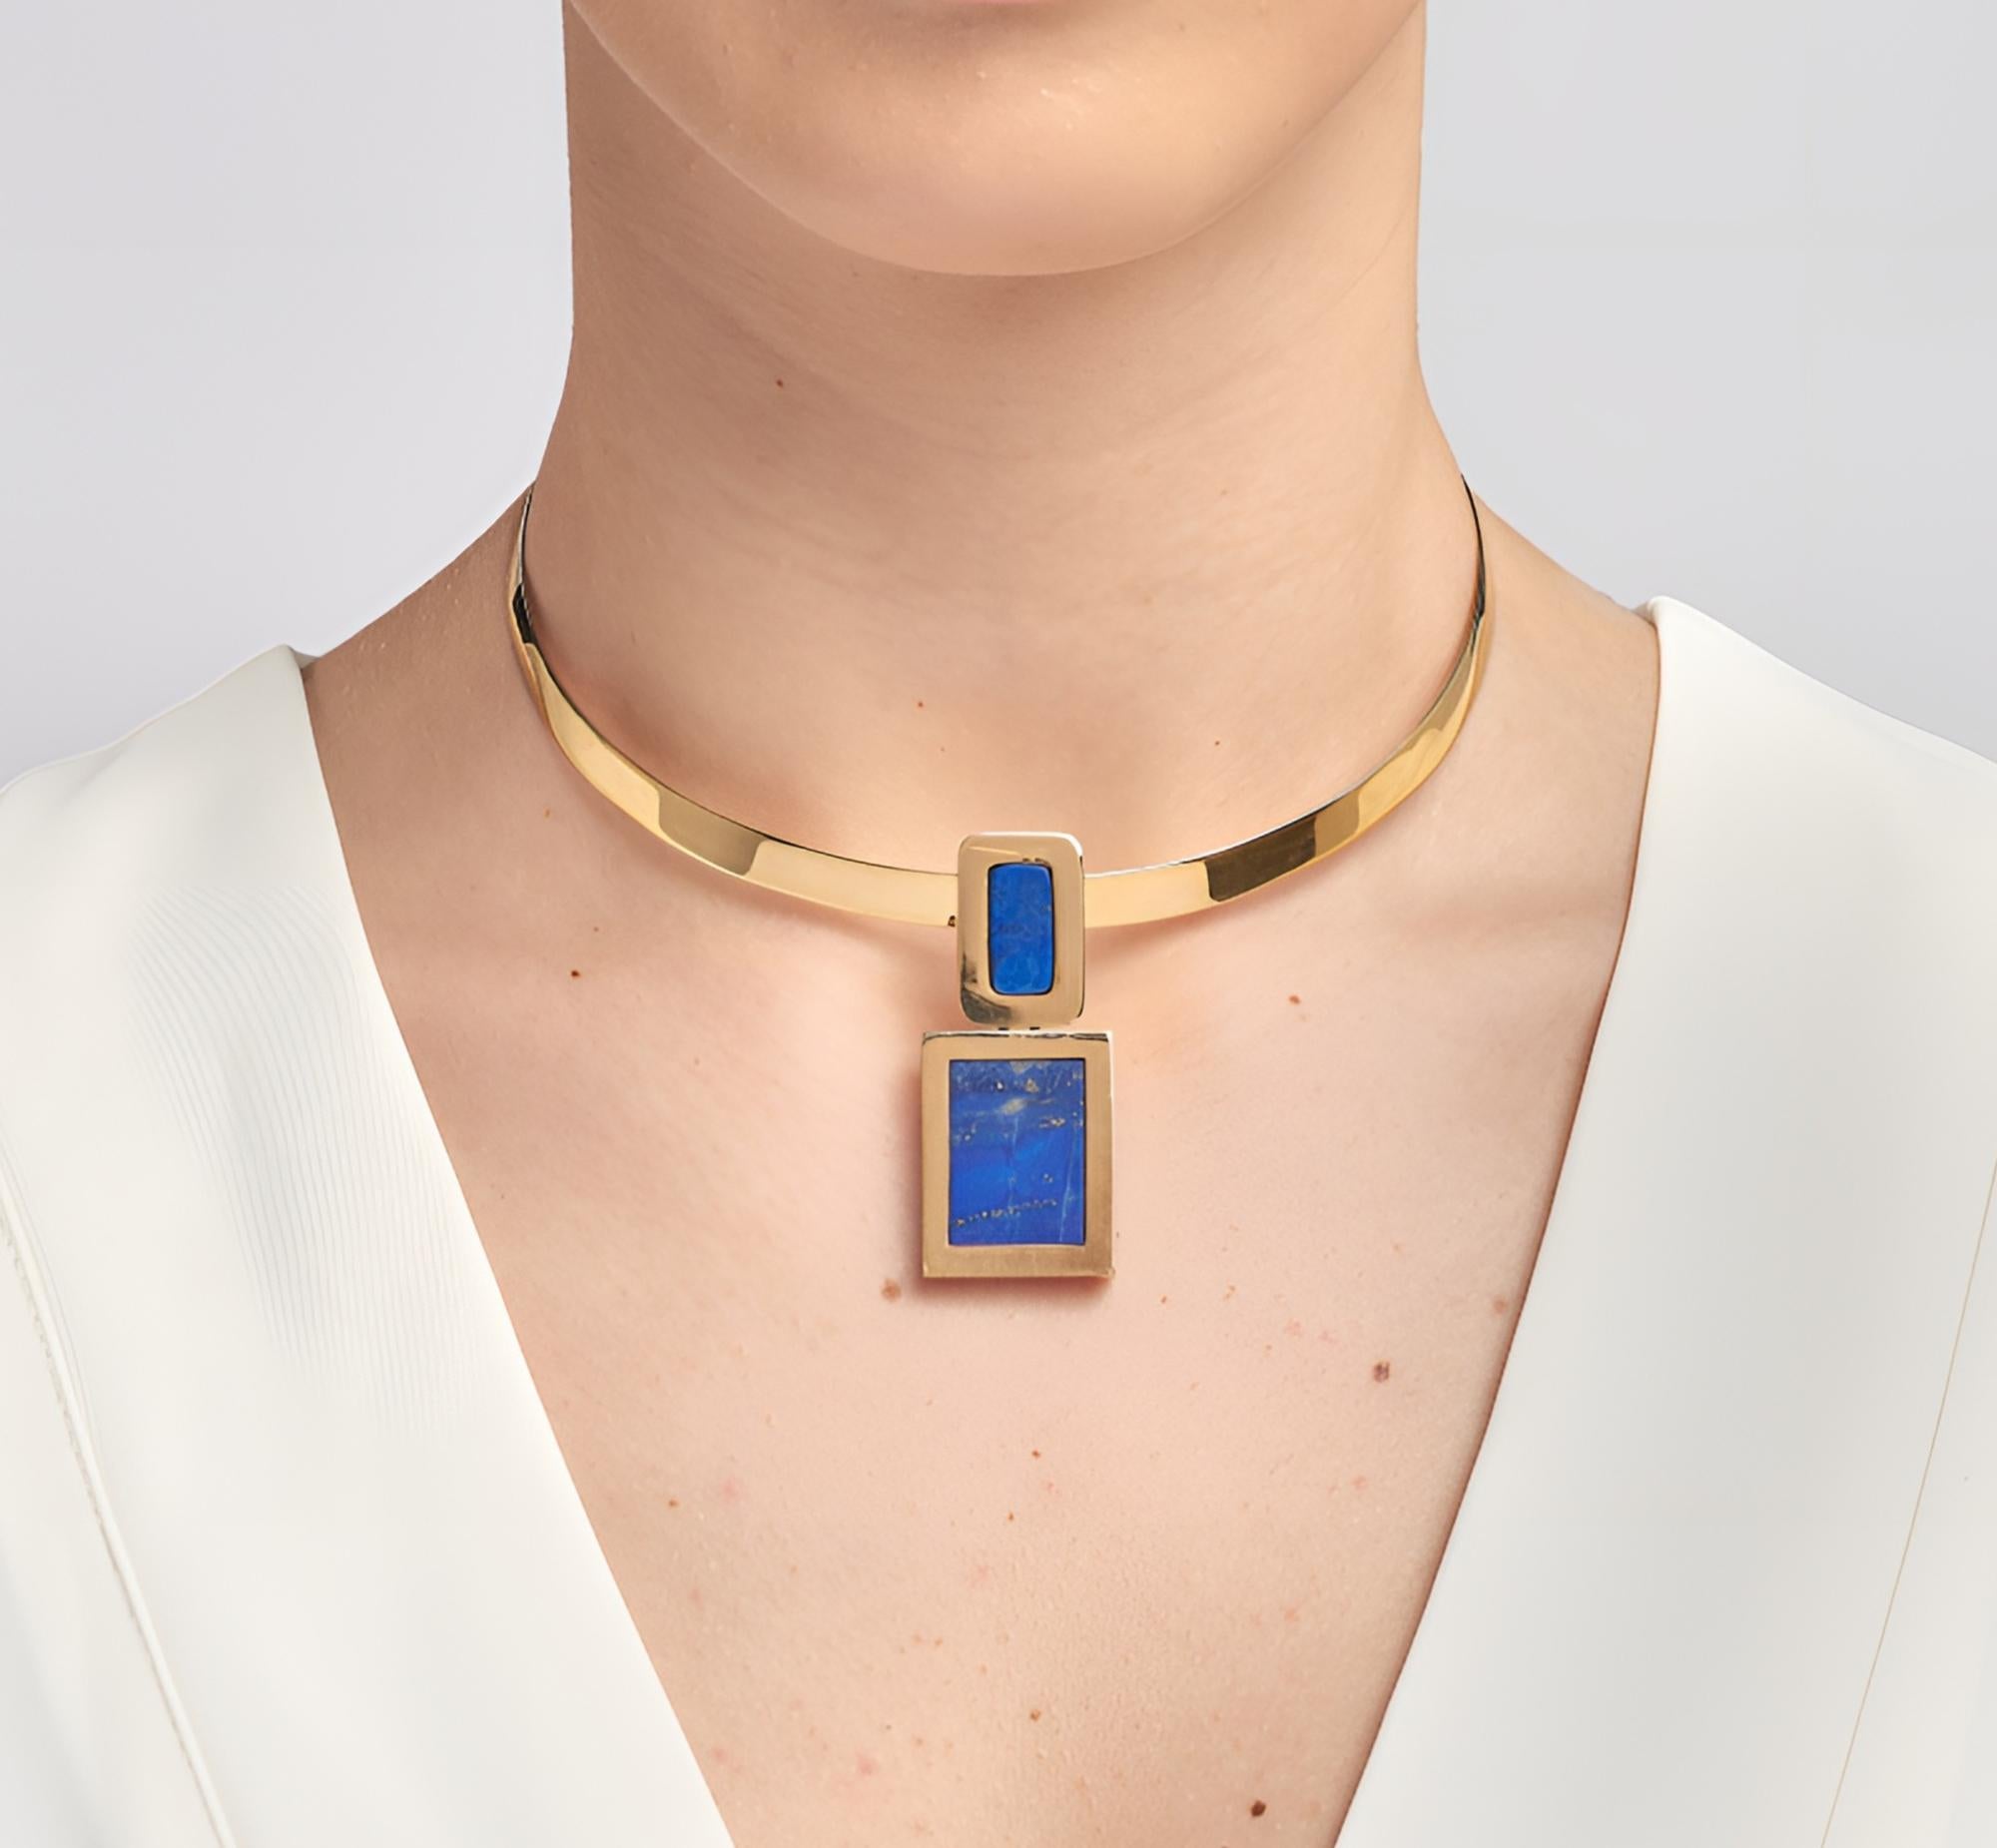 Modernist stylish design signed on the back Reyes 1973
Beautiful hand crafted as art piece of jewelry of solid 18 KT
With a flat and wide torque more suitable for a long slim neck and two geometric forms of substantial gold set with high quality